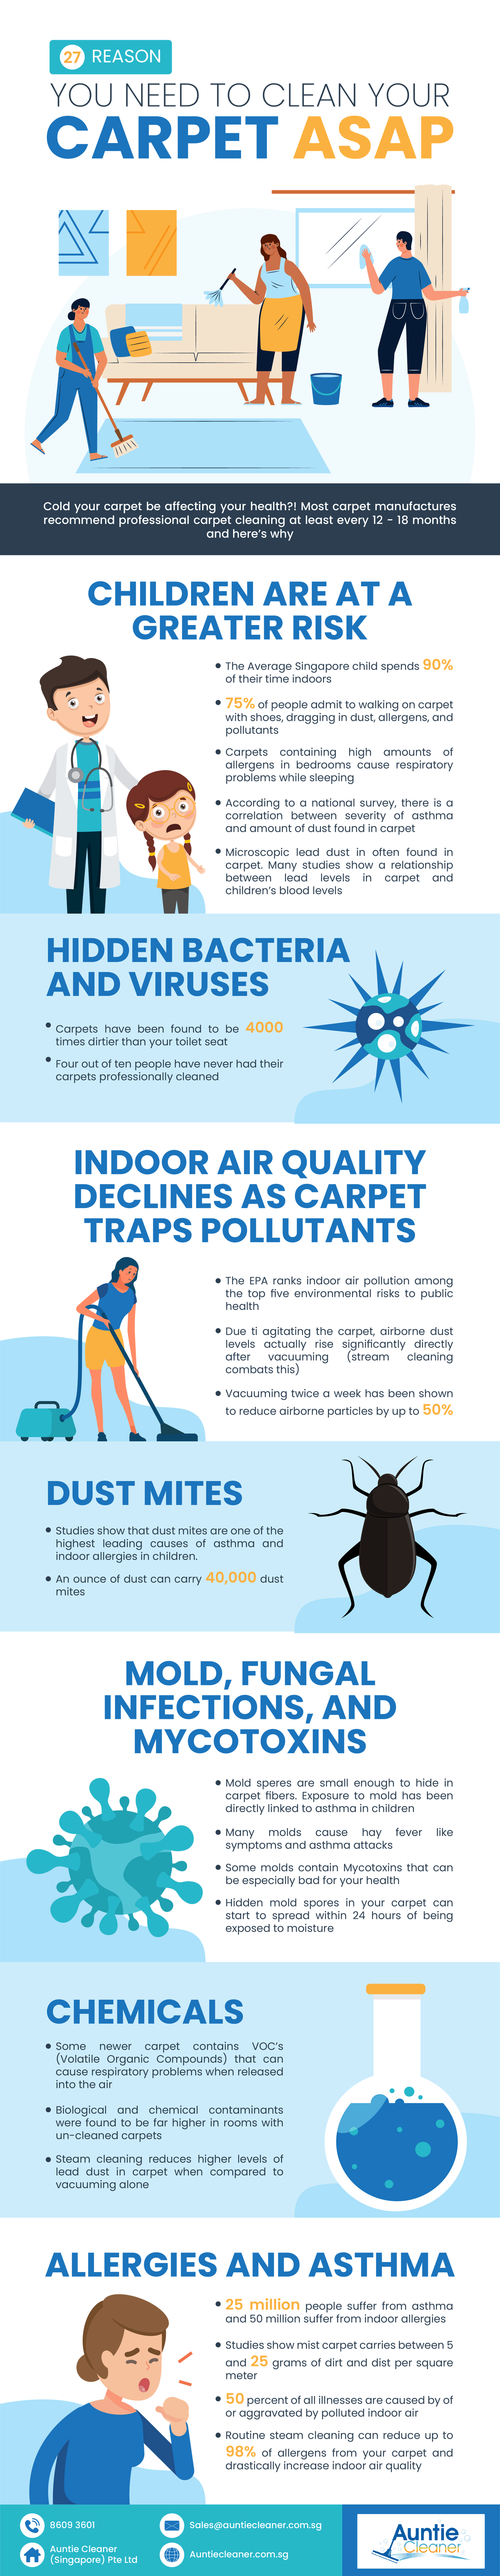 Carpet cleaning infographic